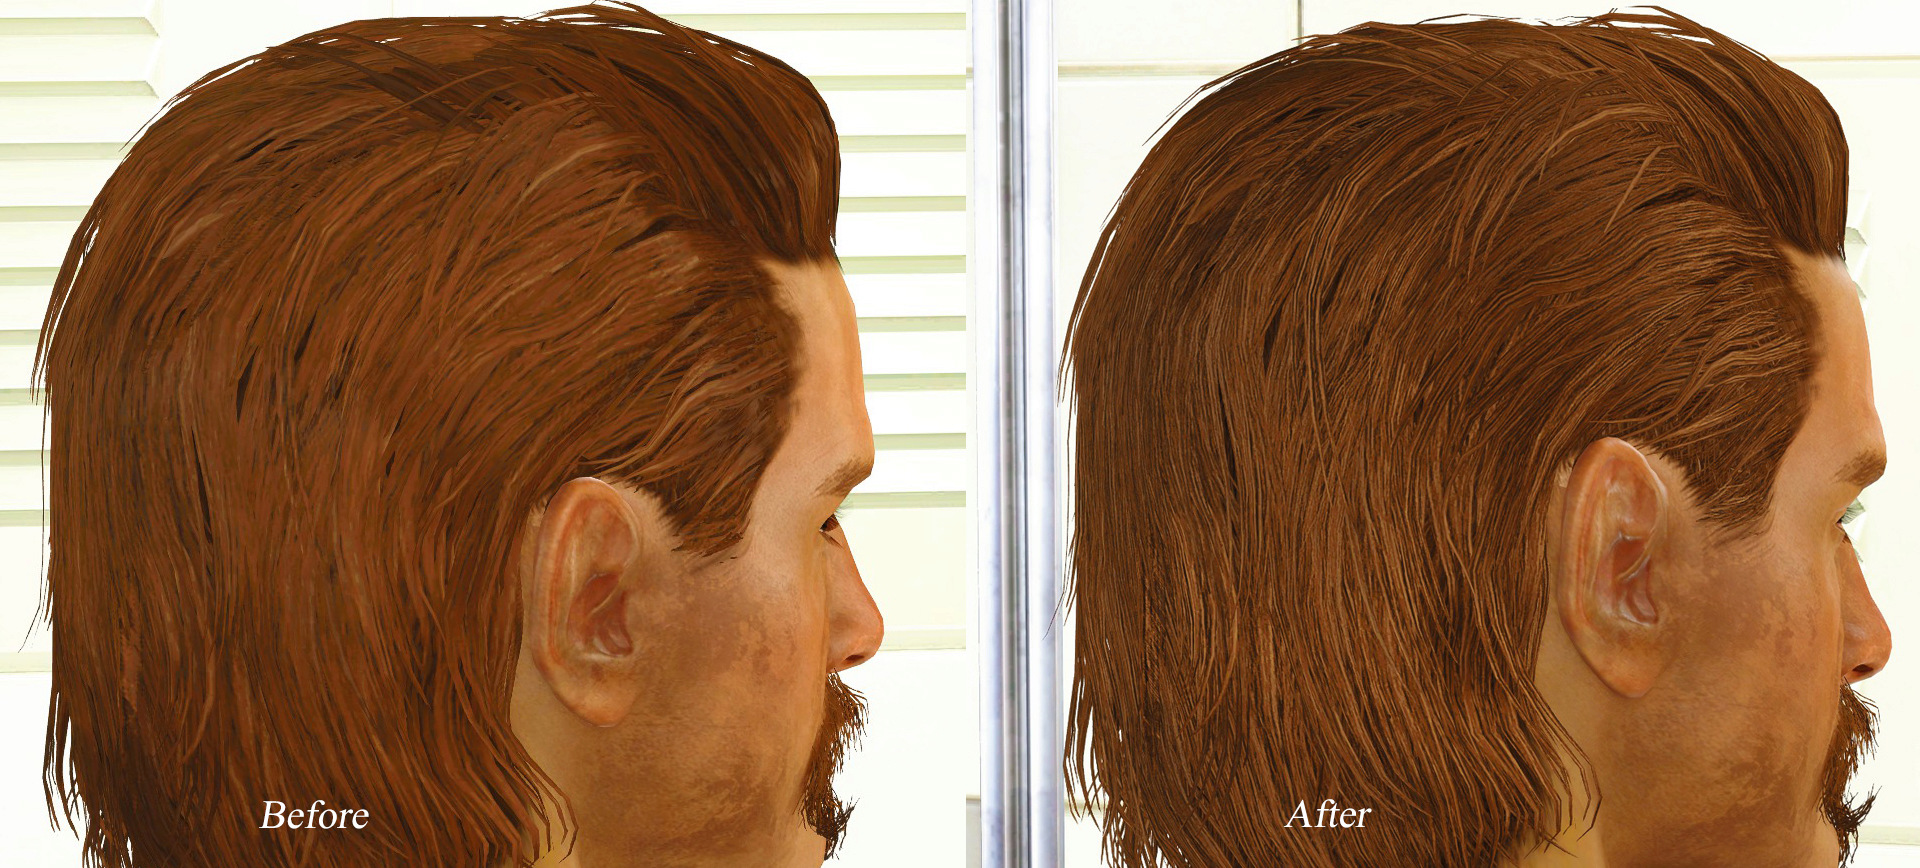 Male hairstyles fallout 4 фото 105